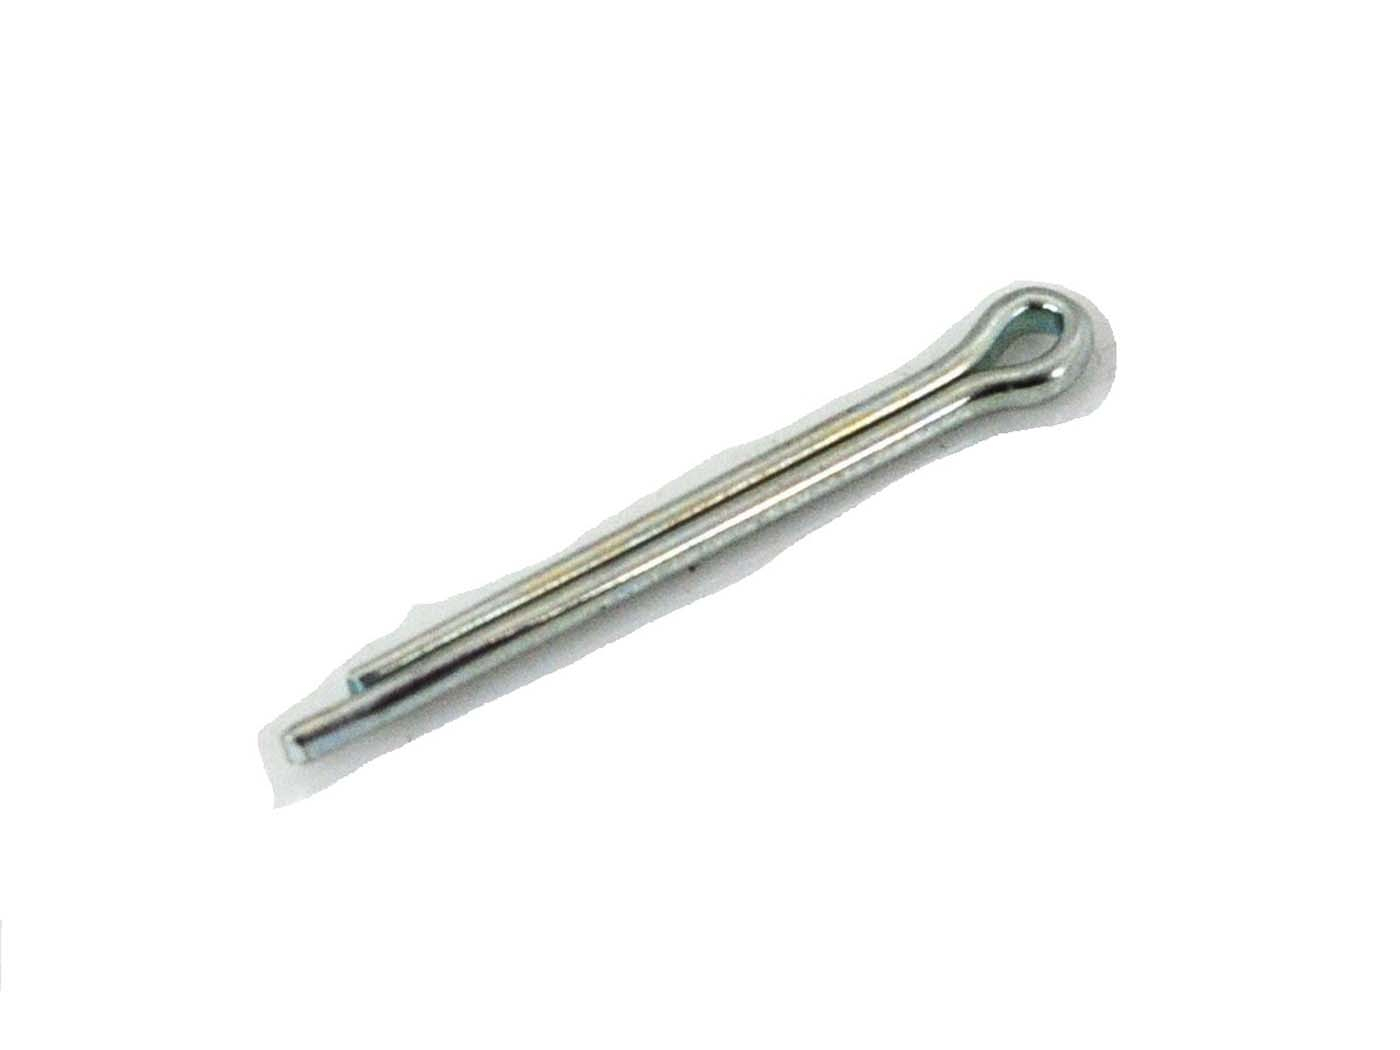 Engine Foot Control Gear Shift Cotter Pin For Hercules Sachs 50/3 50/4